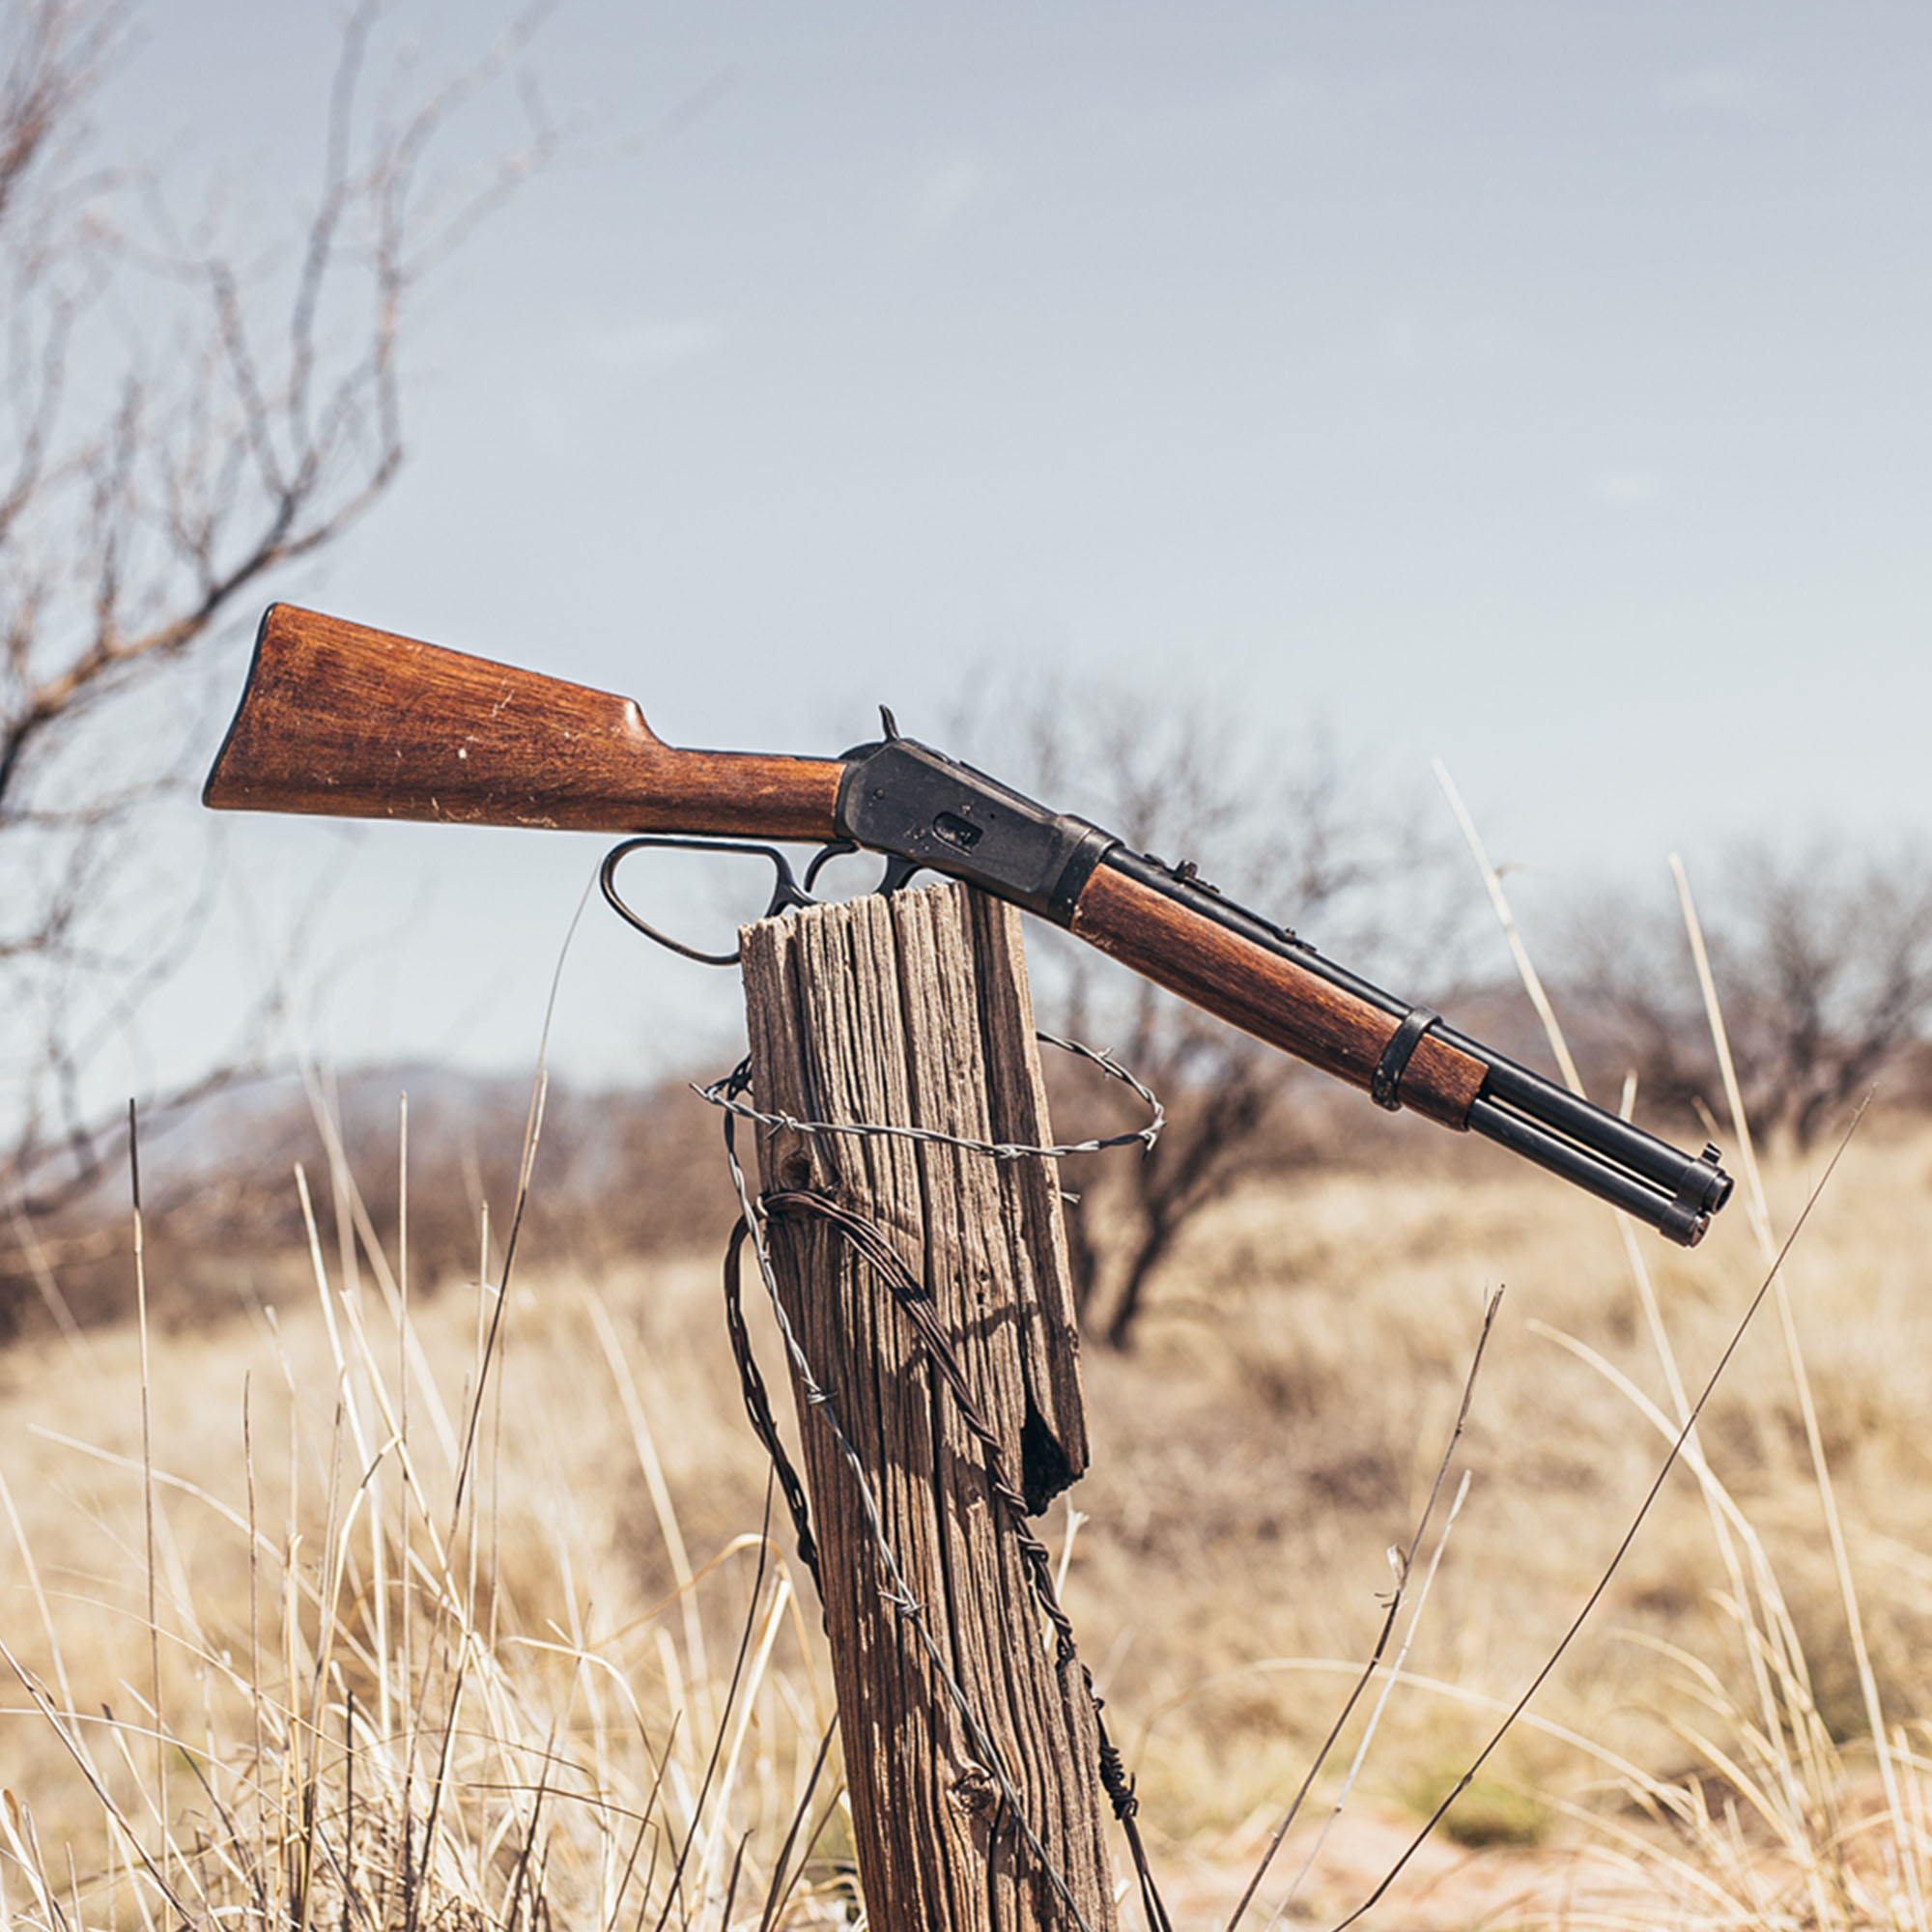 replica 1892 old west rifle on a fence post